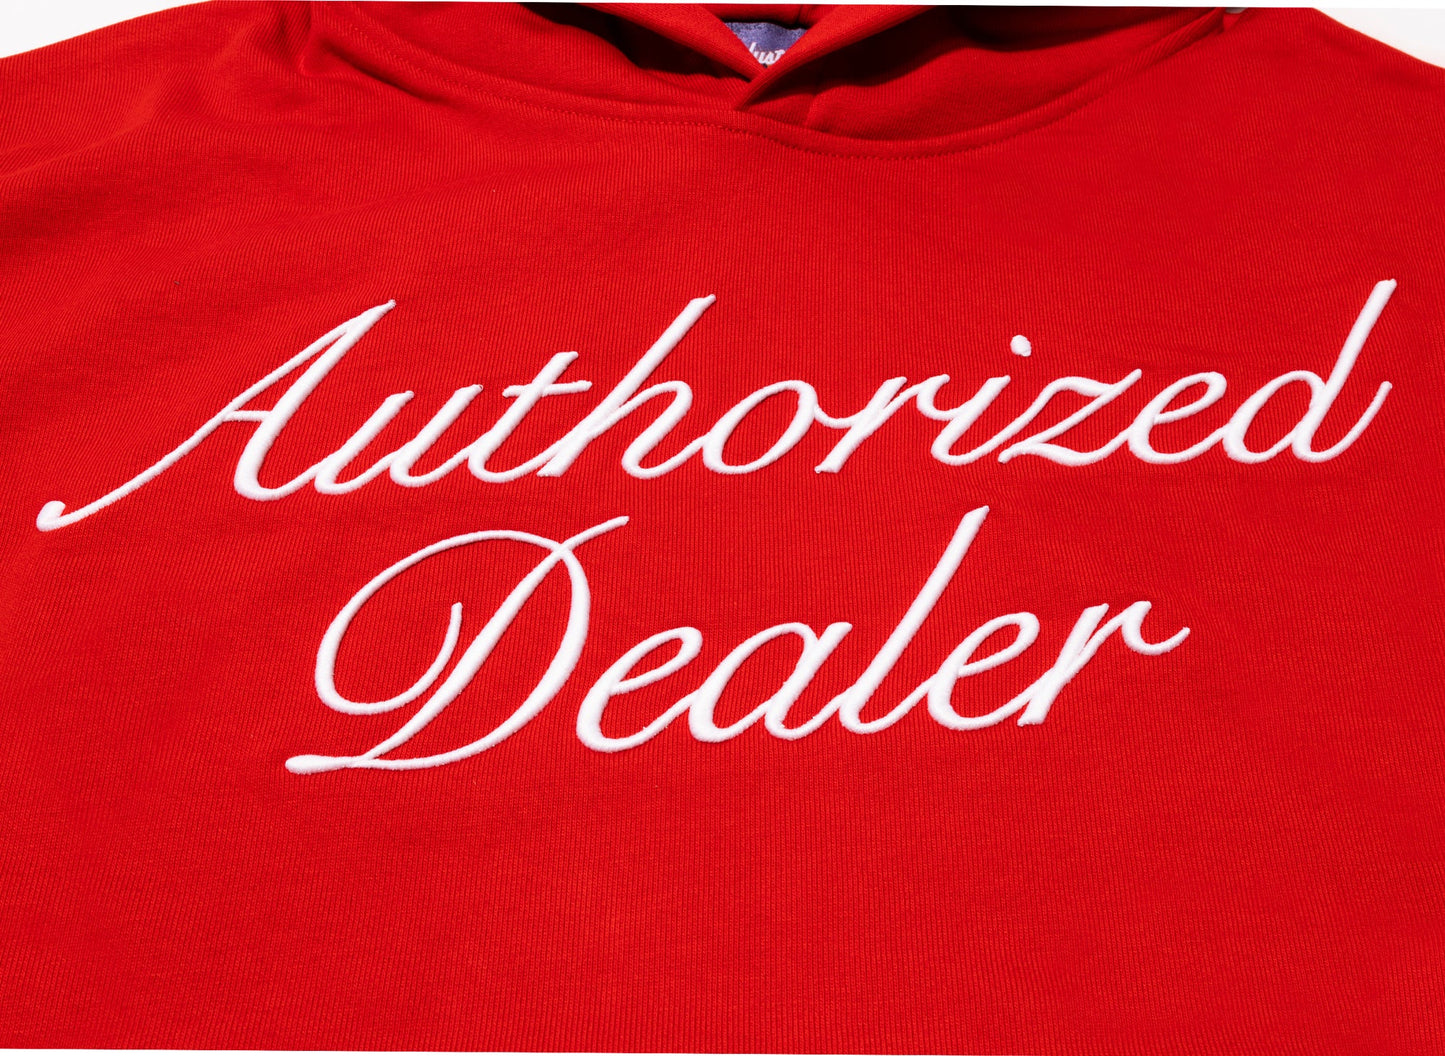 Just Don Authorized Dealer Hoodie